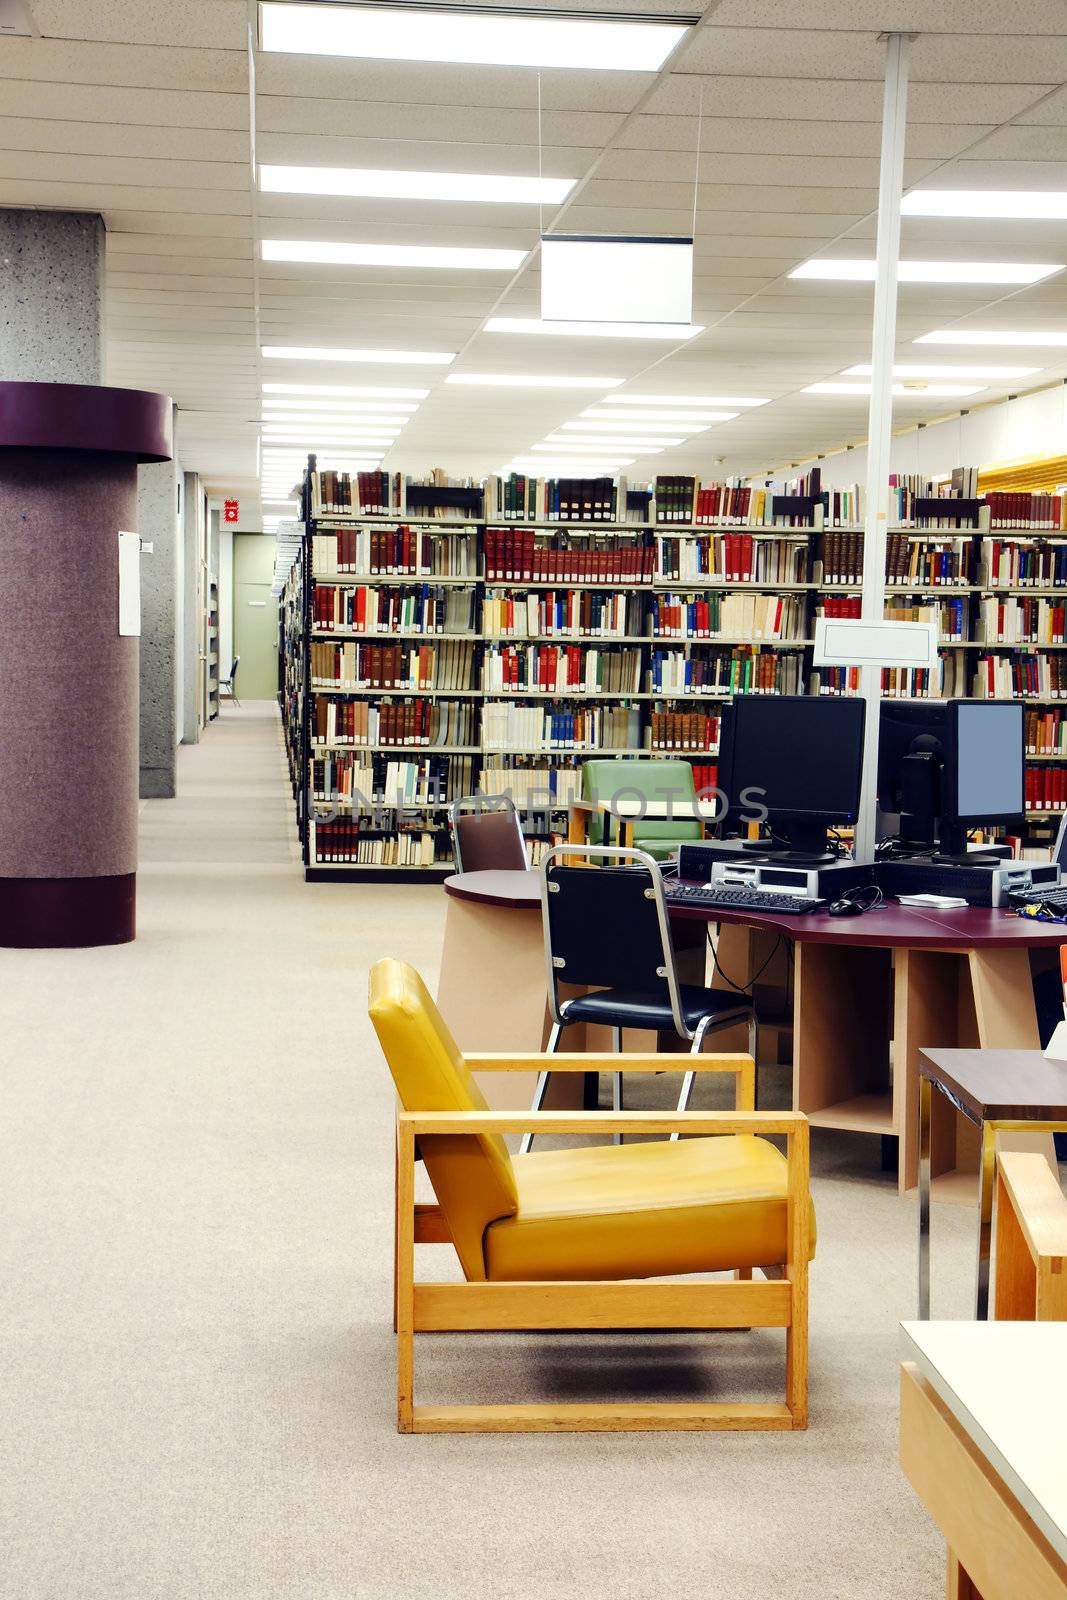 University library with comfortable leather reading chairs and computer station for research, copy space on the left.